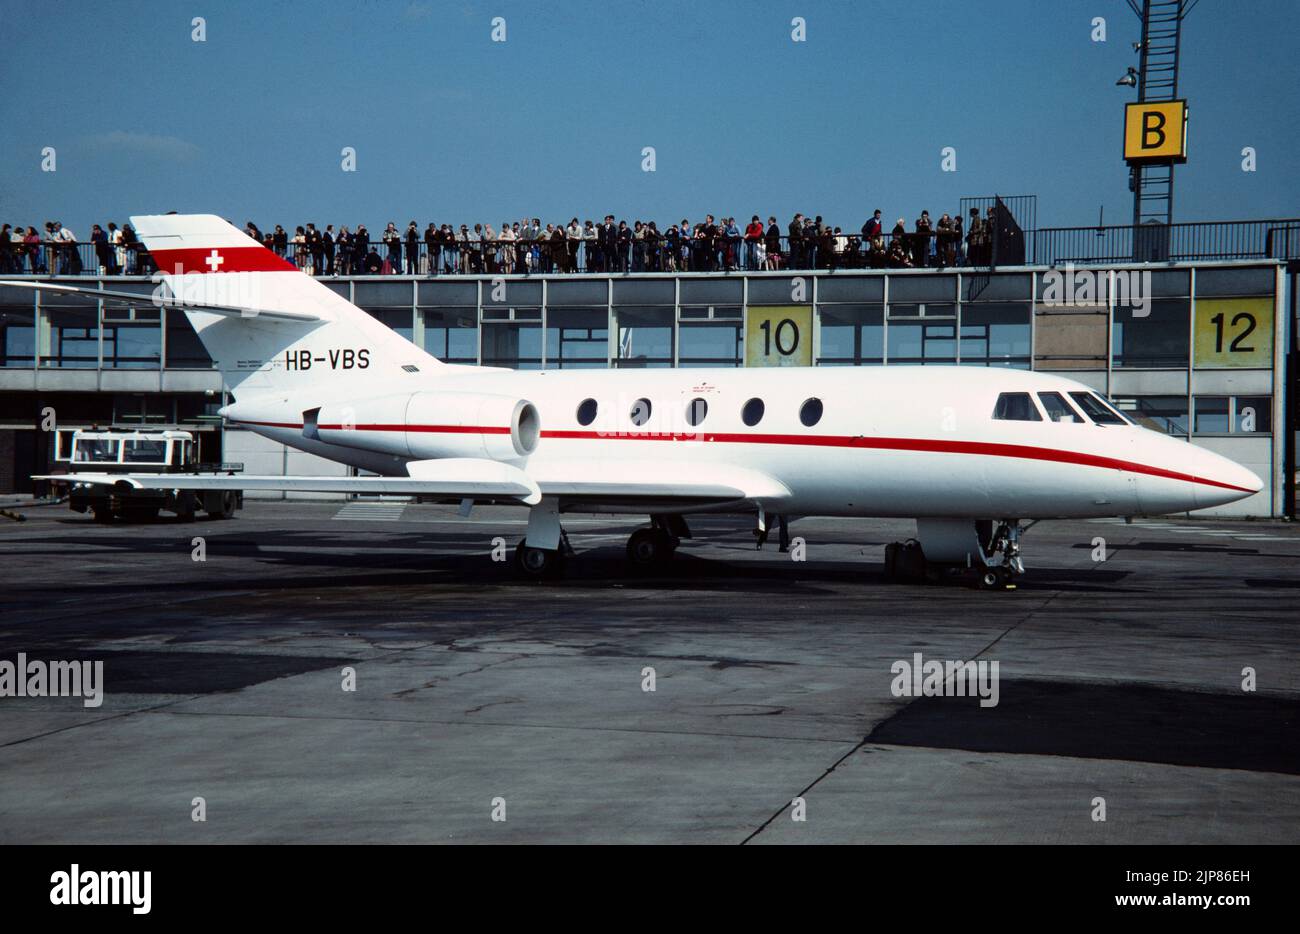 A Dassault Falcon 20, 20C, Business, executive, corporate, private Jet, registered in Switzerland as HB-VBS. Many people standing watching aeroplanes at the airport. Stock Photo